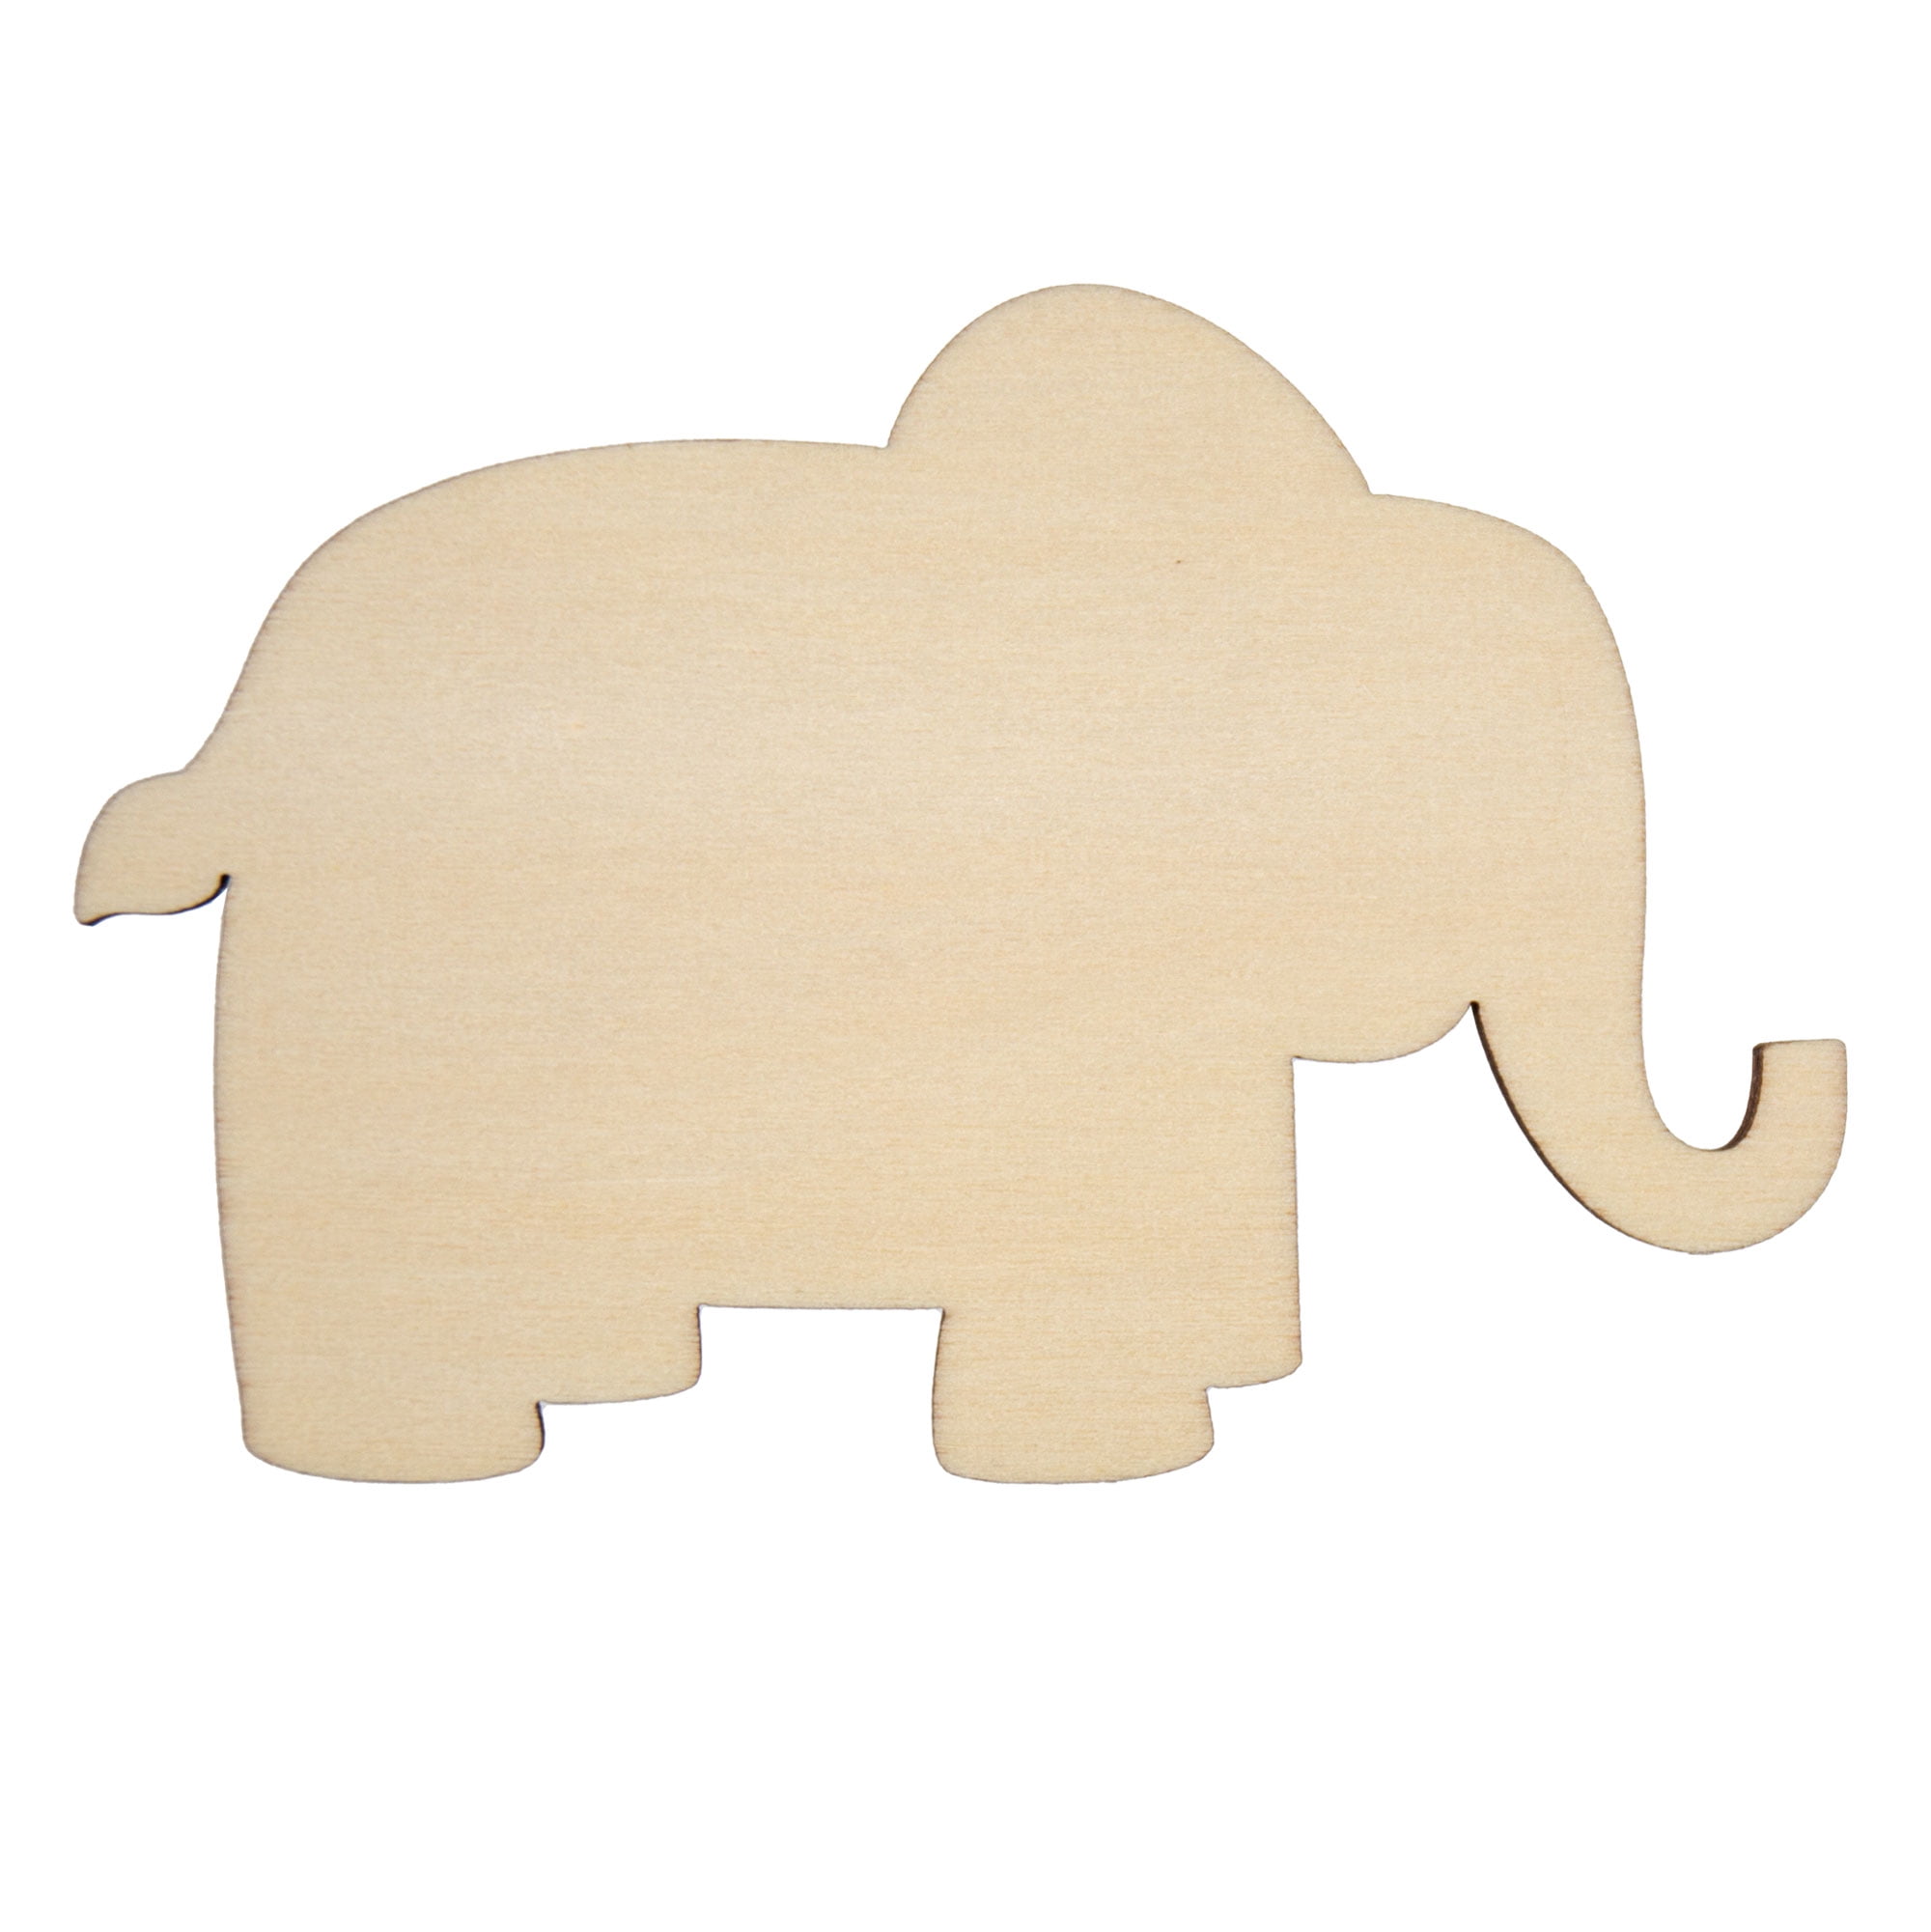 Hello Hobby Wooden Elephant Shape, Ready-to-Decorate Die-Cut Shape Wood, 4" x 0.15" x 2.75"